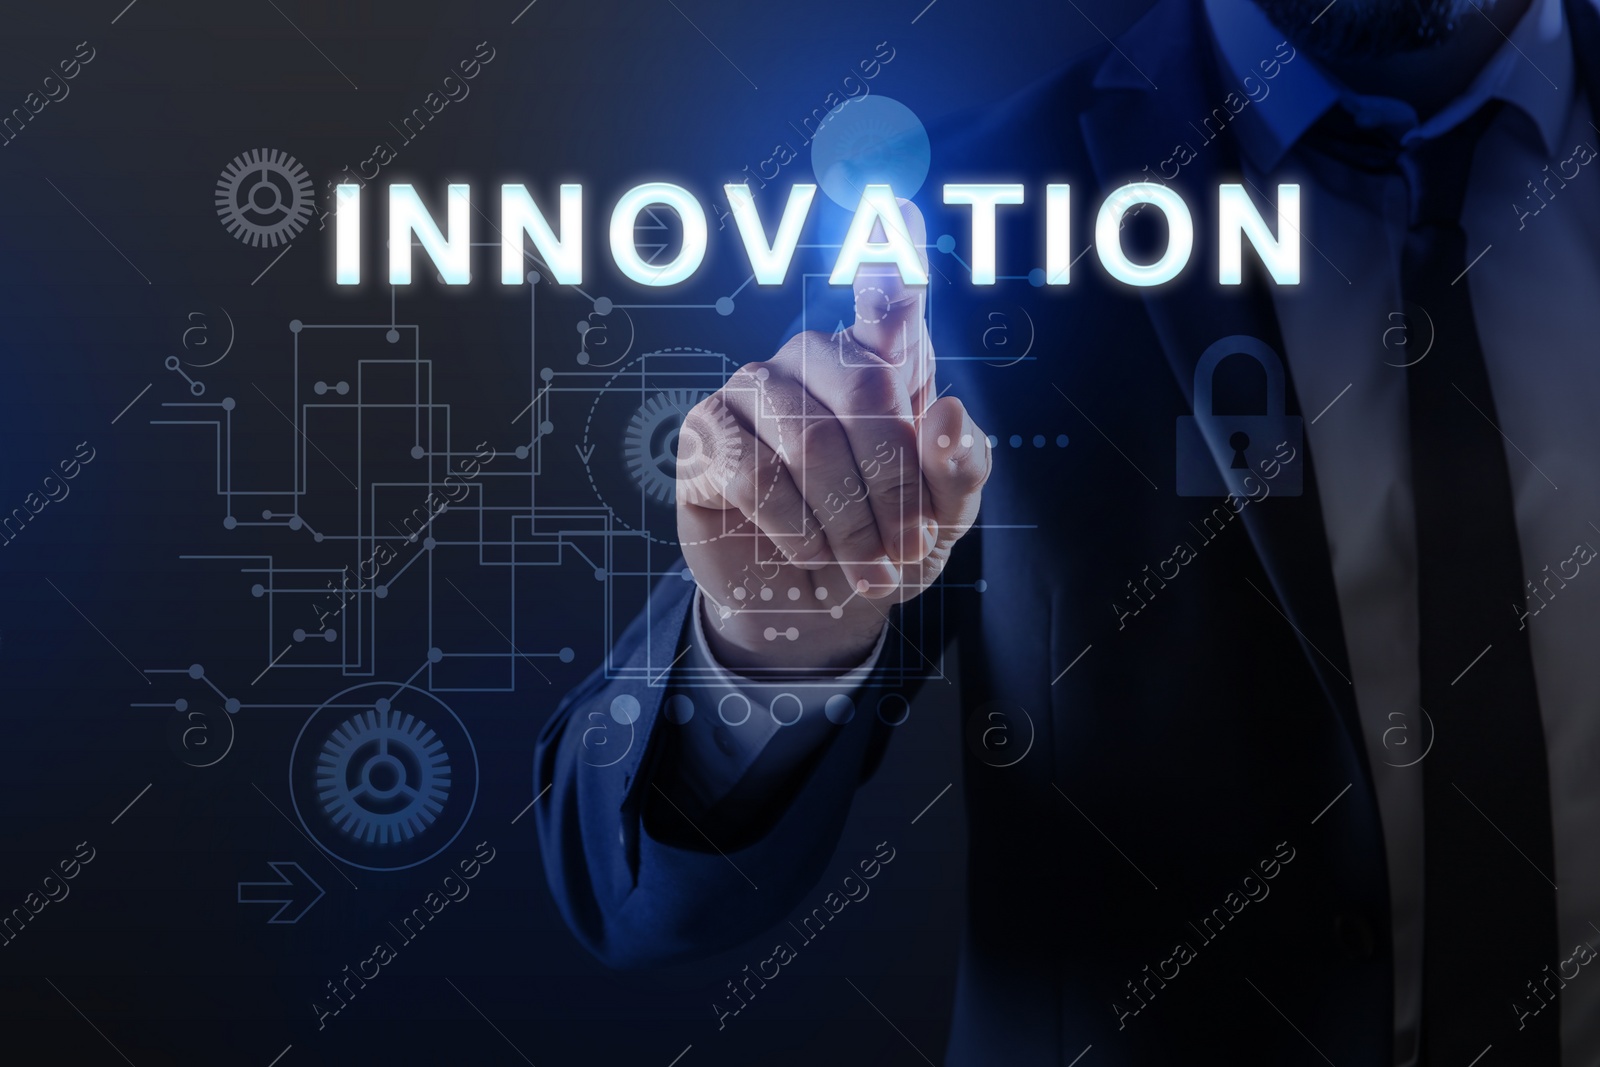 Image of Man touching word Innovation on digital screen against dark background, closeup